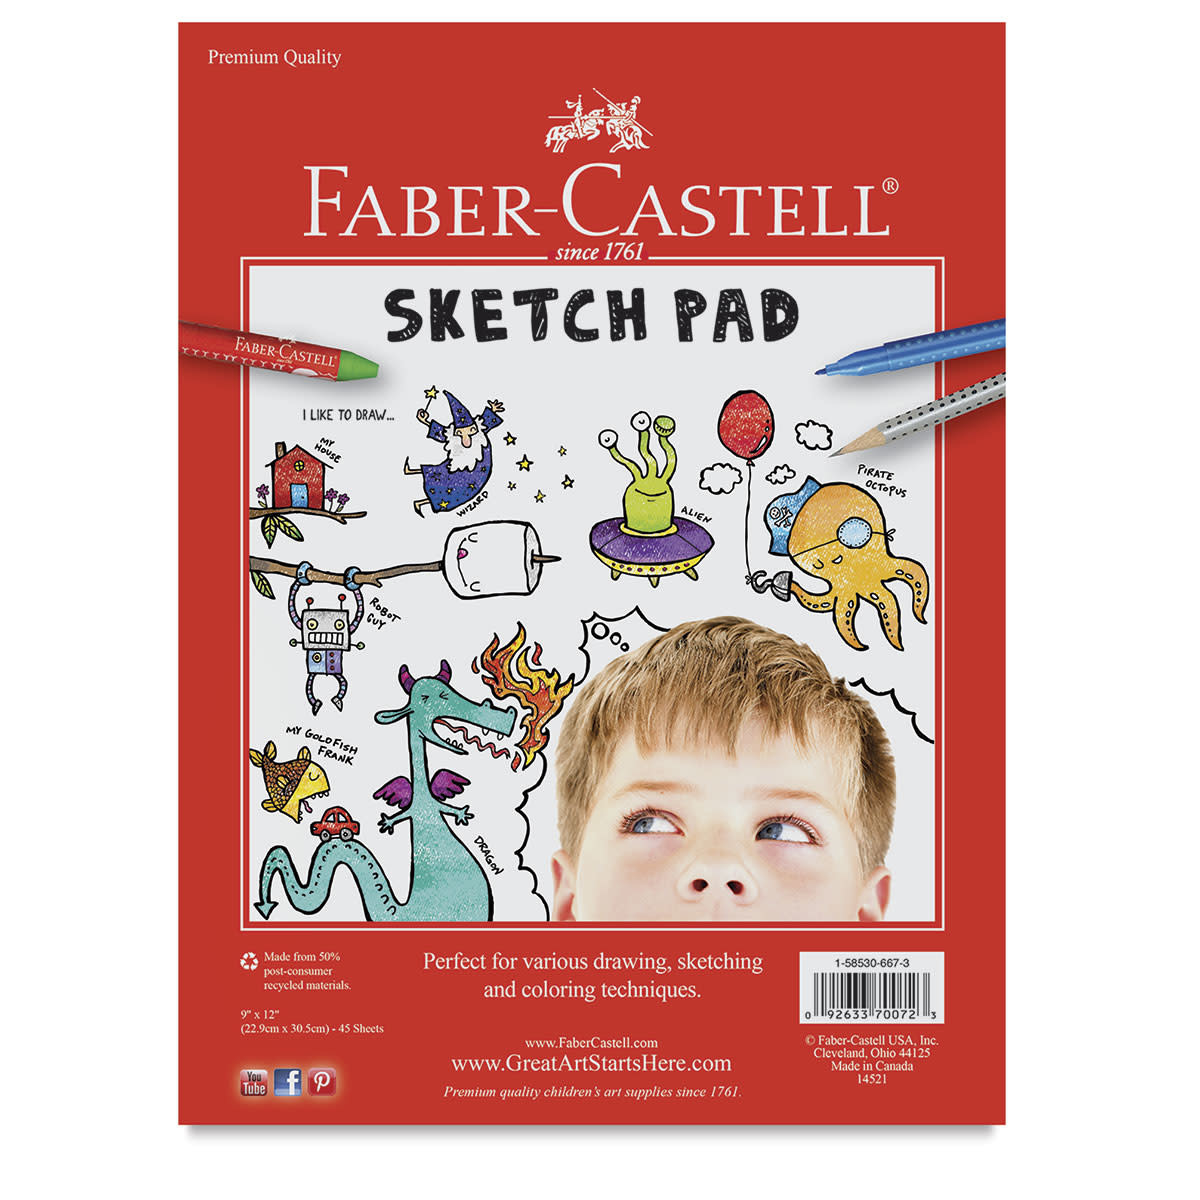 Sketch Pad for Kids: This Large Hardcover Sketchbook with its Cute Cover  and 110 Premium White Pages is Great for Drawing, Coloring, Sketching and